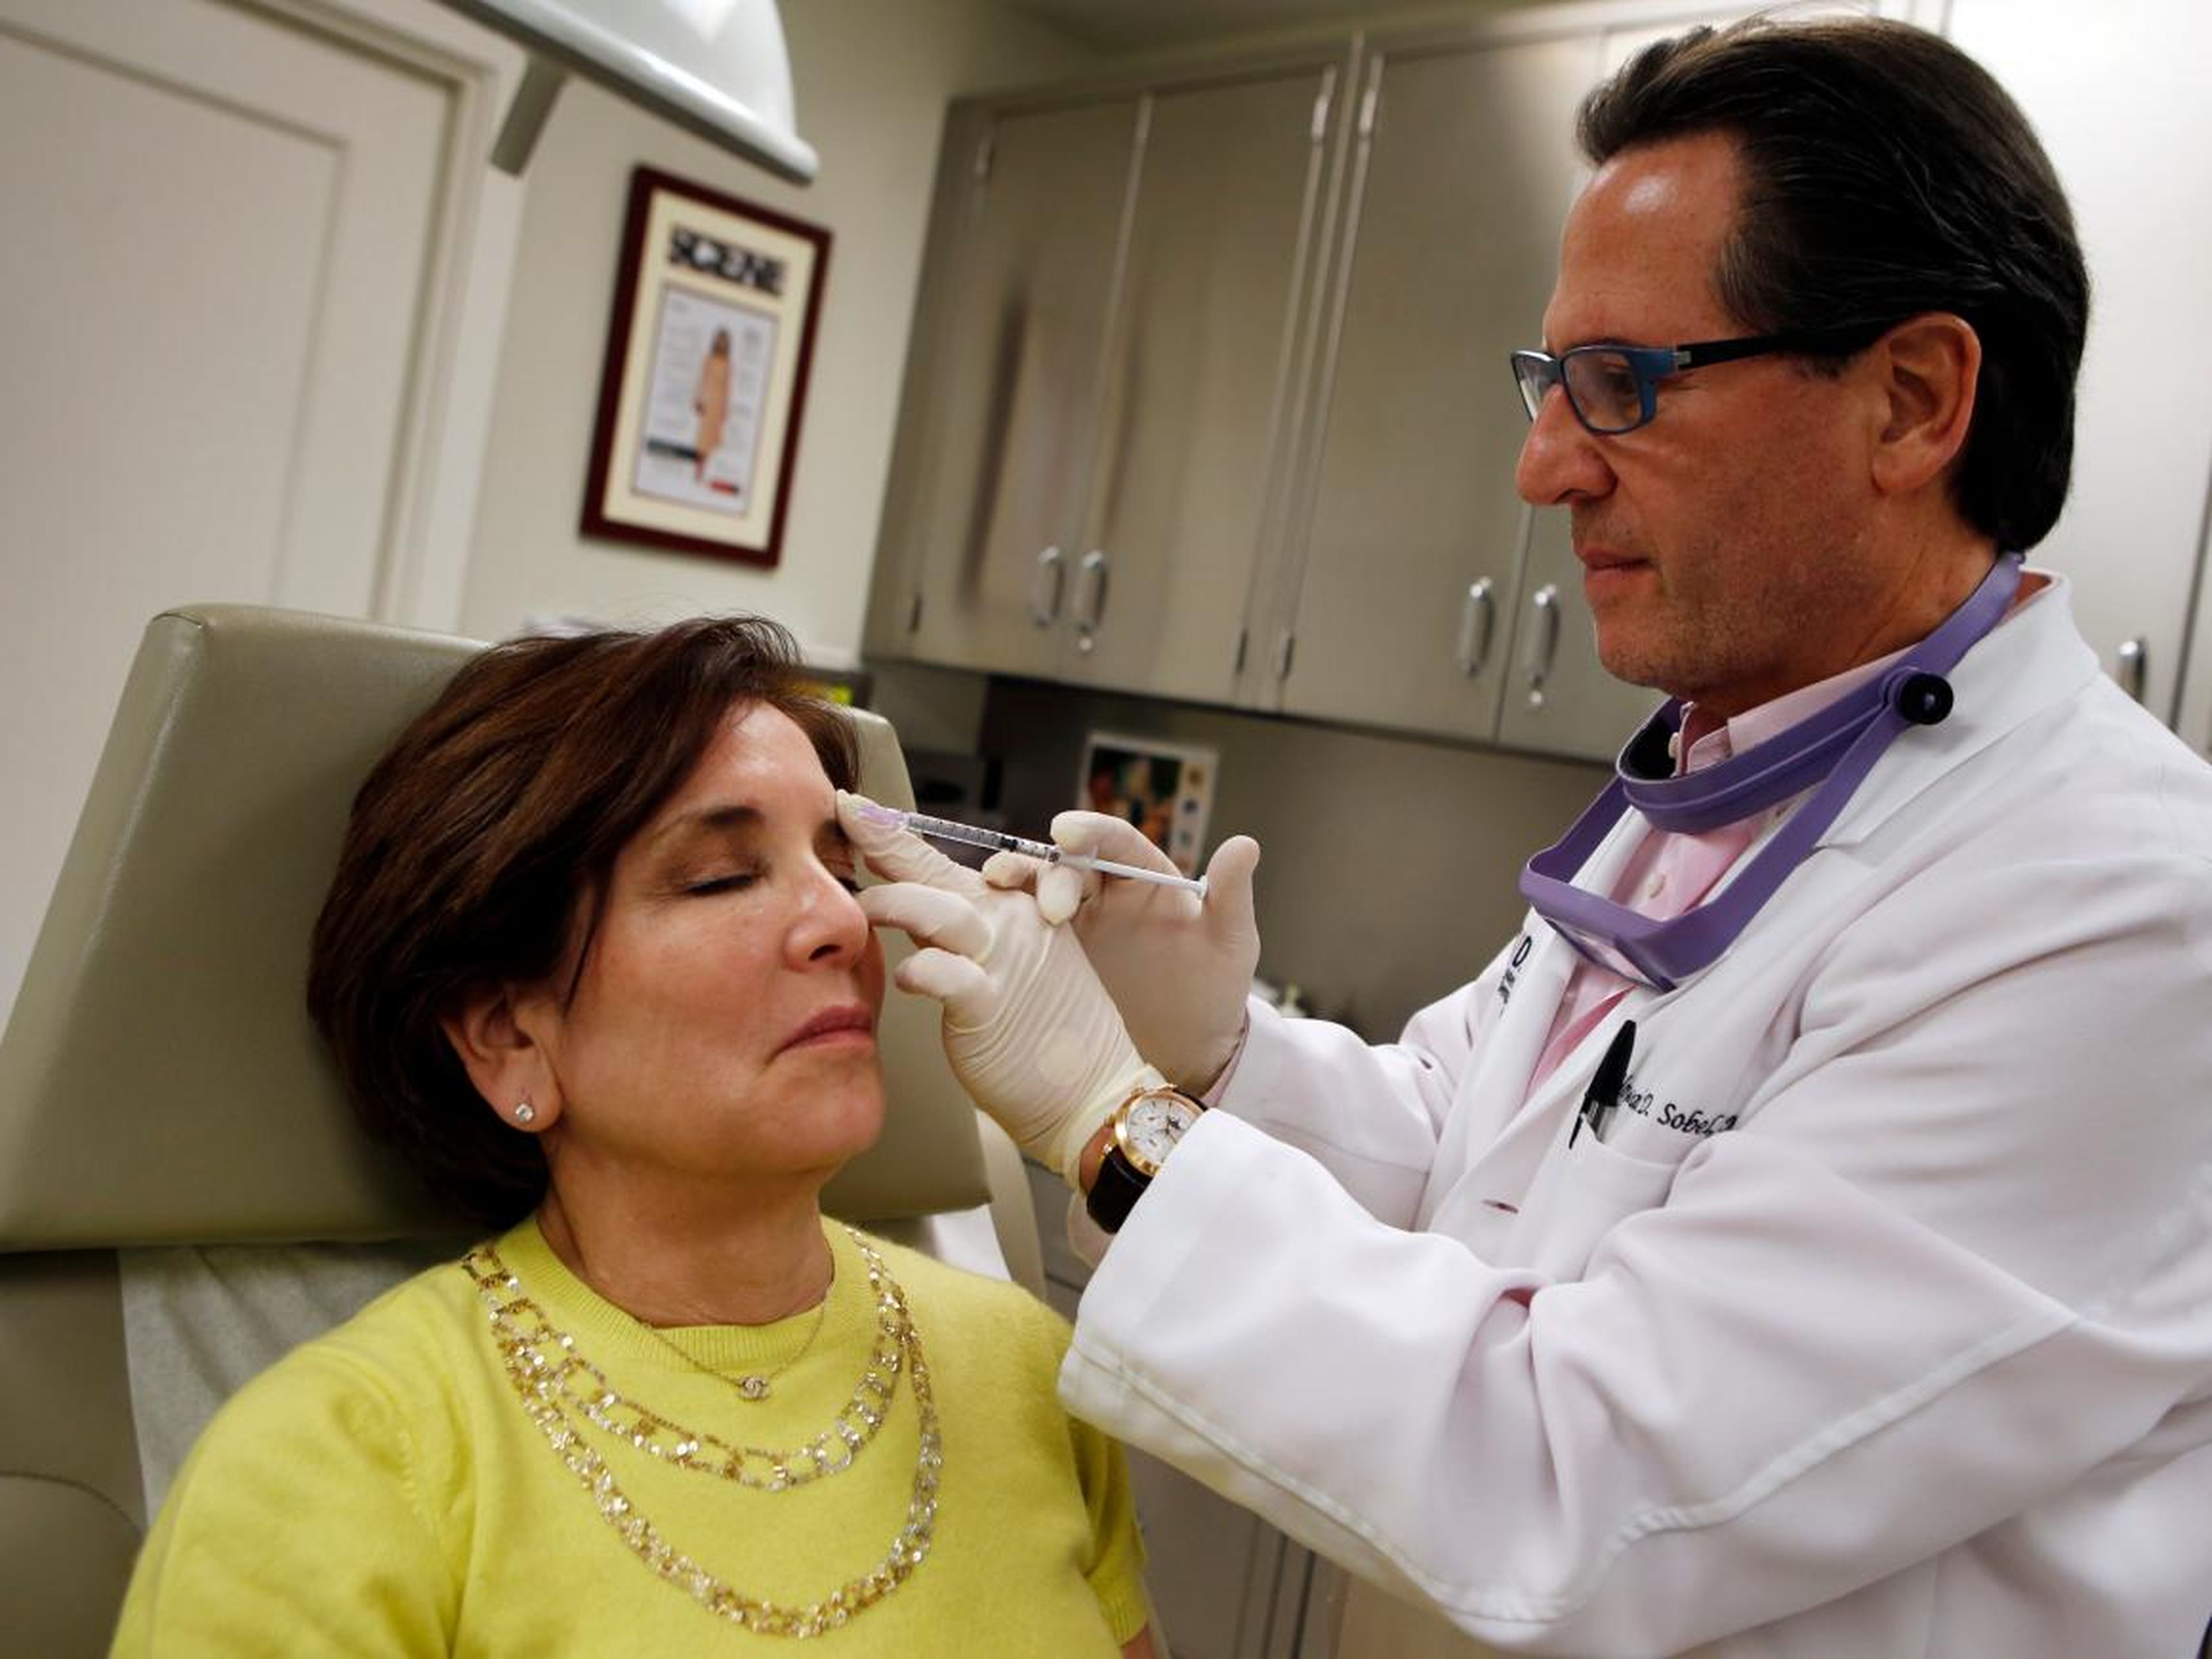 Over the next decade, the Carruthers went on to research and publish on the cosmetic use of Botox. Botox grew so popular that at one point in 1997, the US had run out of its supply, inciting panic for those who used the treatment